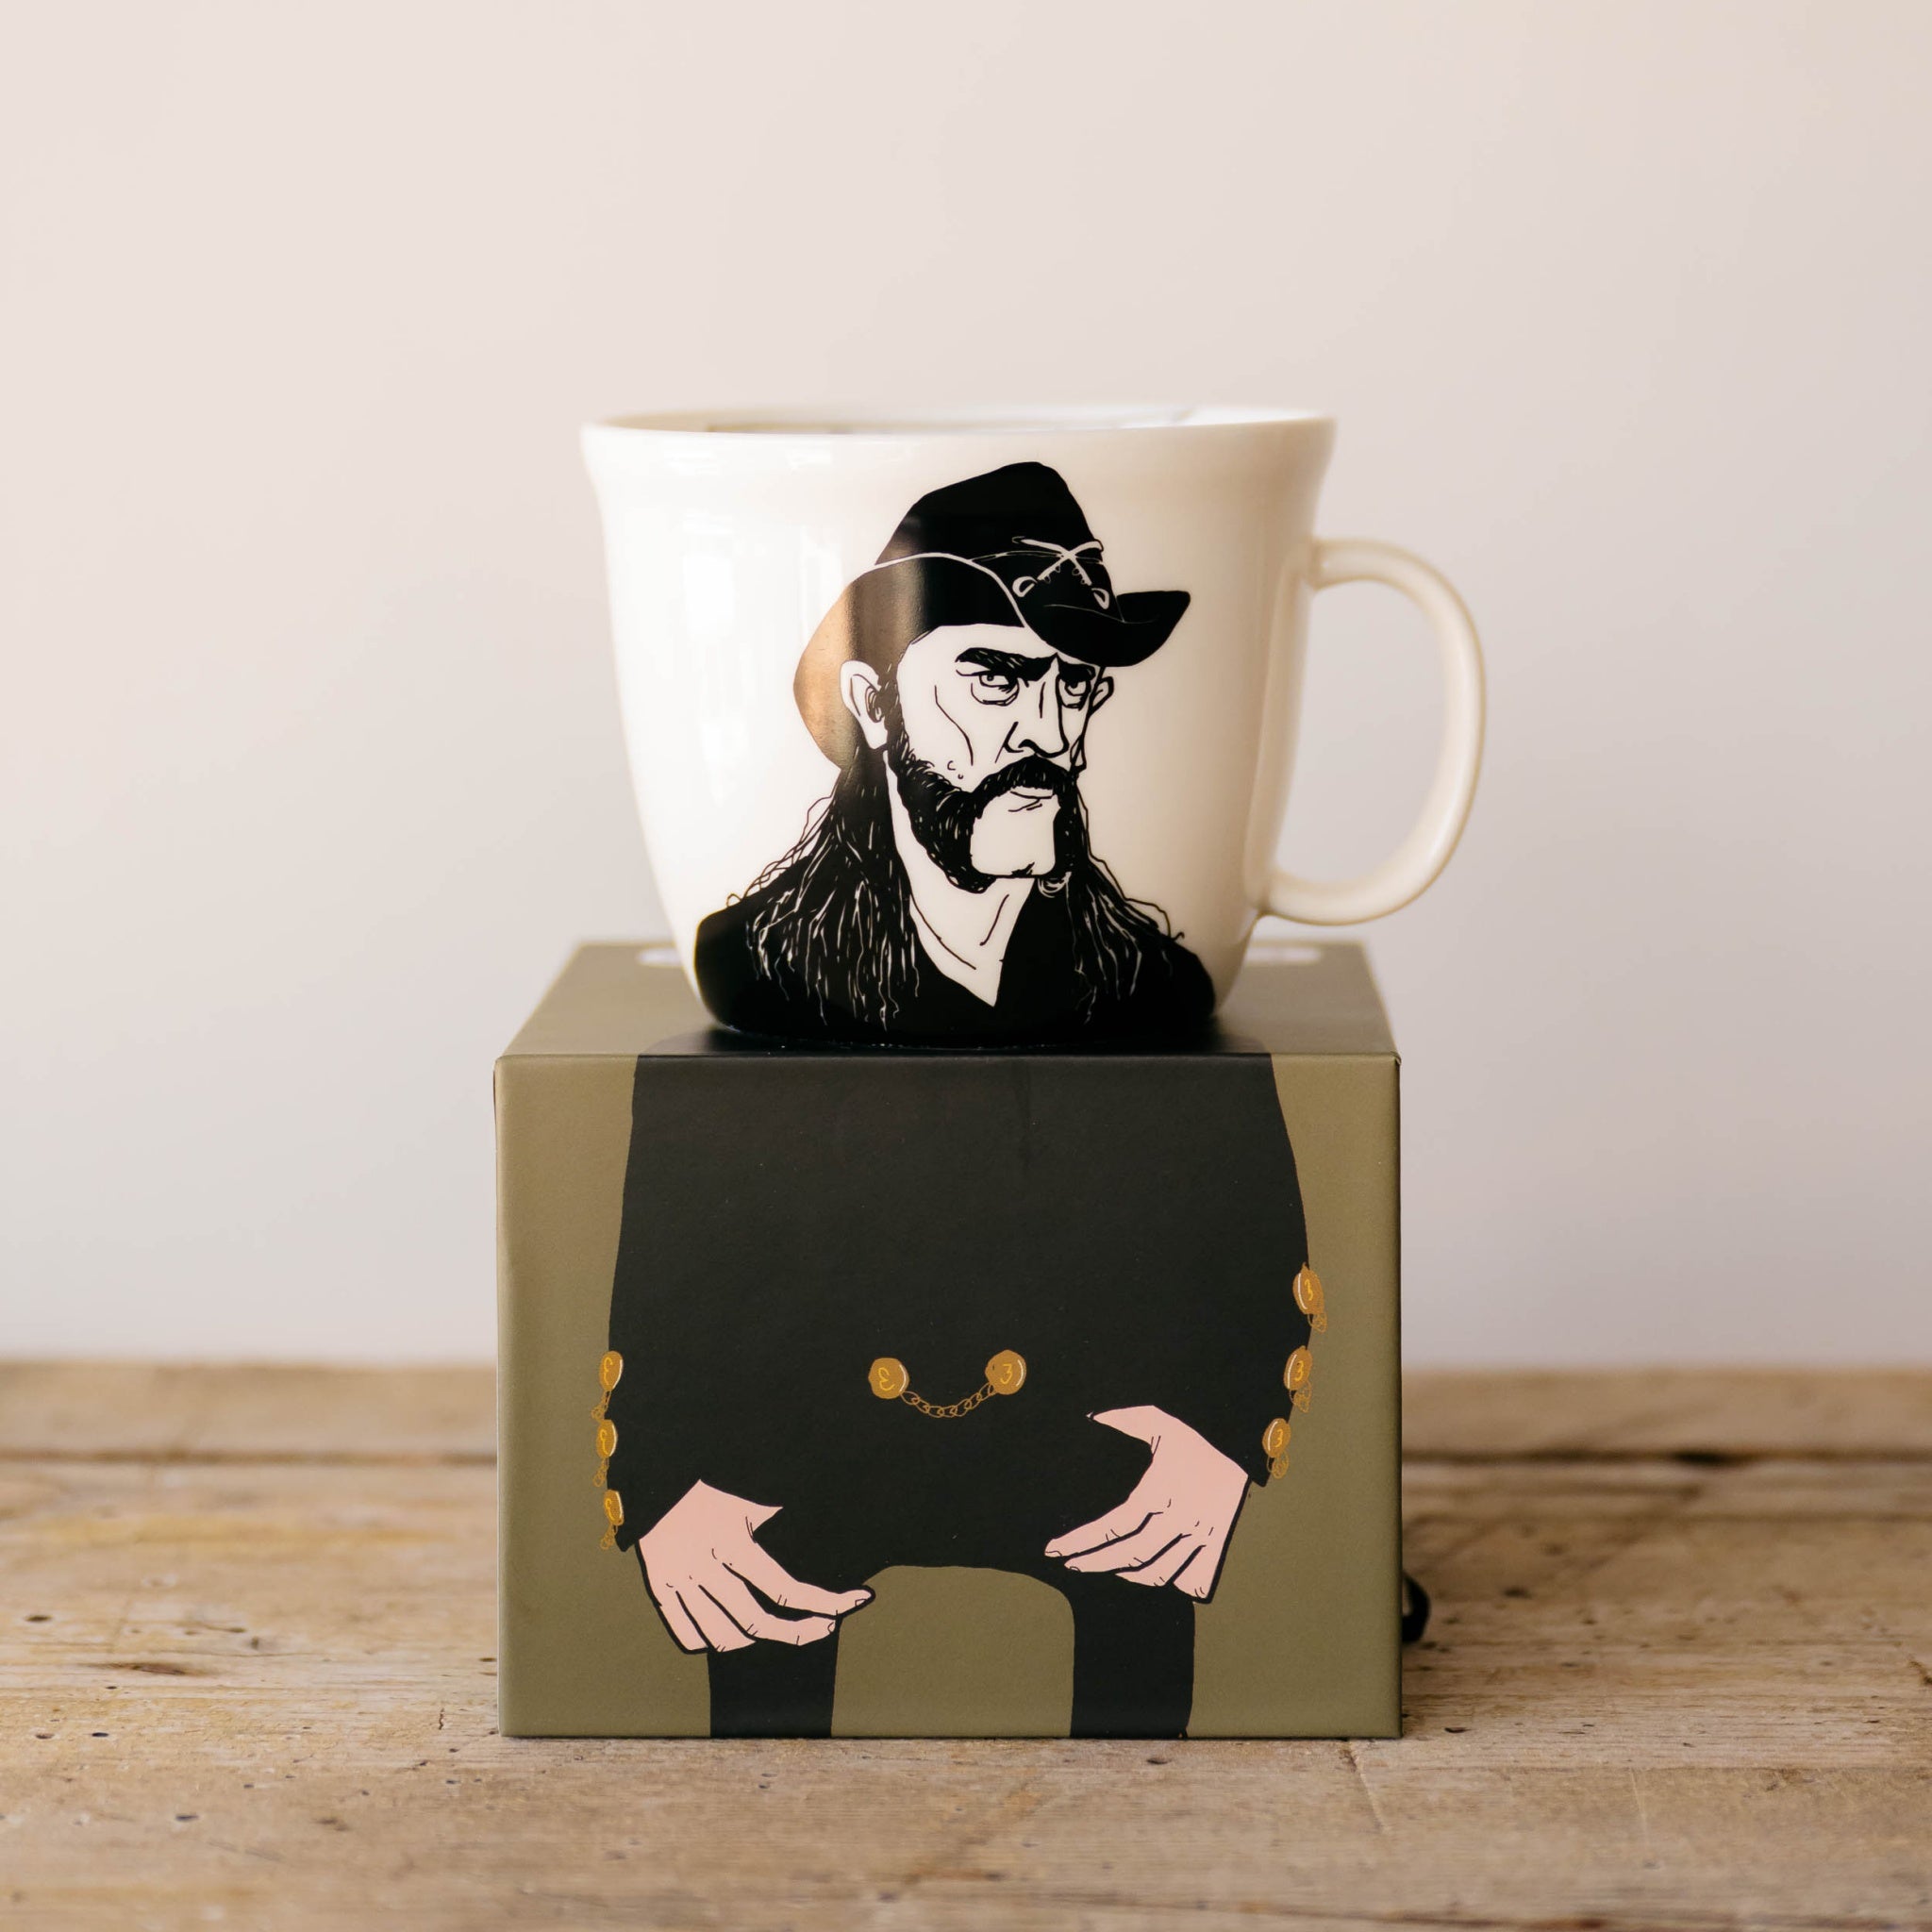 Porcelain cup inspired by Lemmy Kilmister on the box